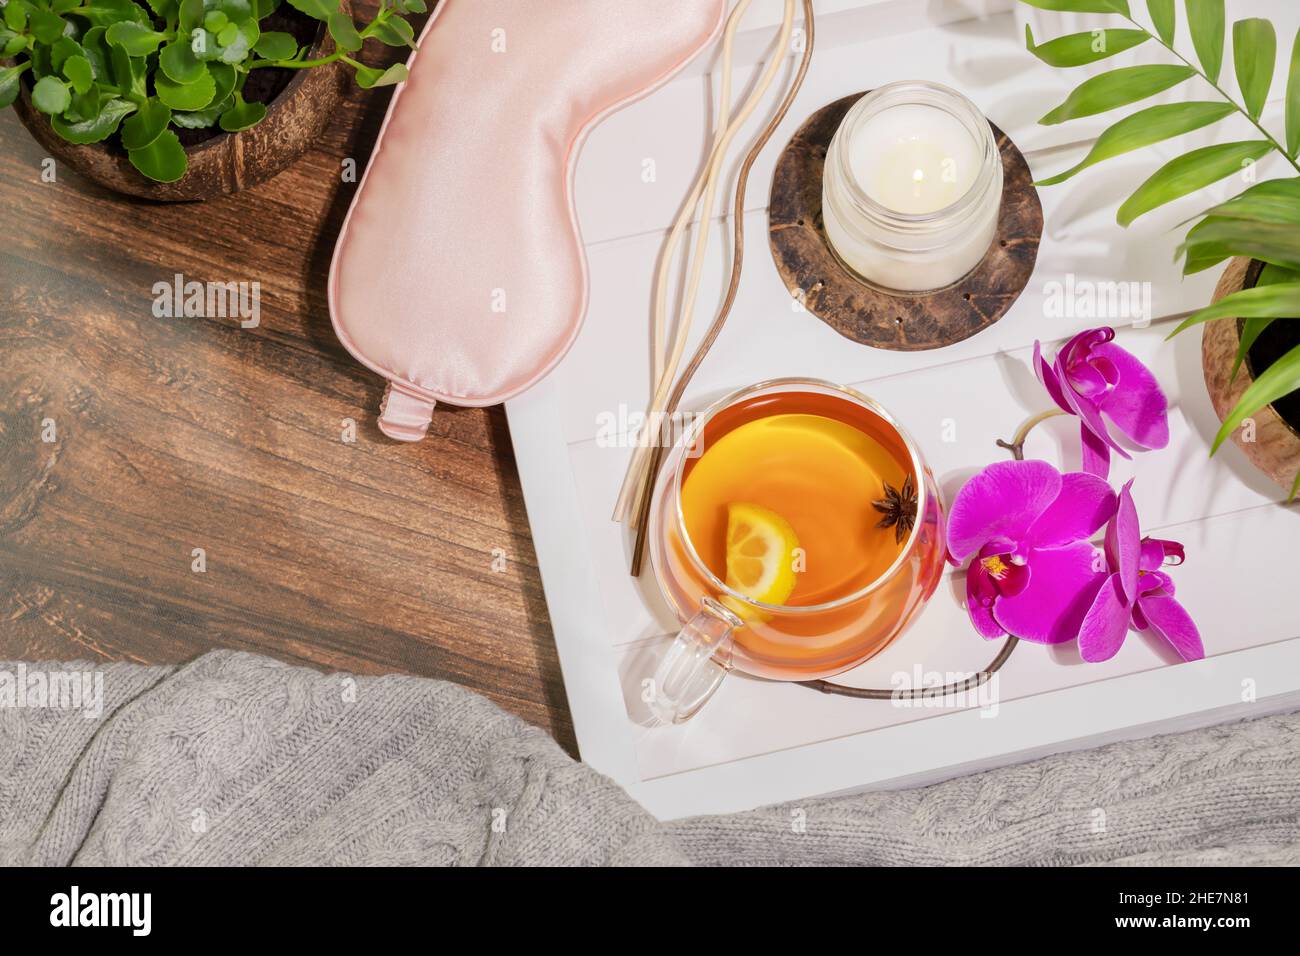 Insomnia or depression treatment. Home relaxing concept. Wooden tray with cup of fruit tea with lemon slice, aroma candle and sticks with palm leaves Stock Photo